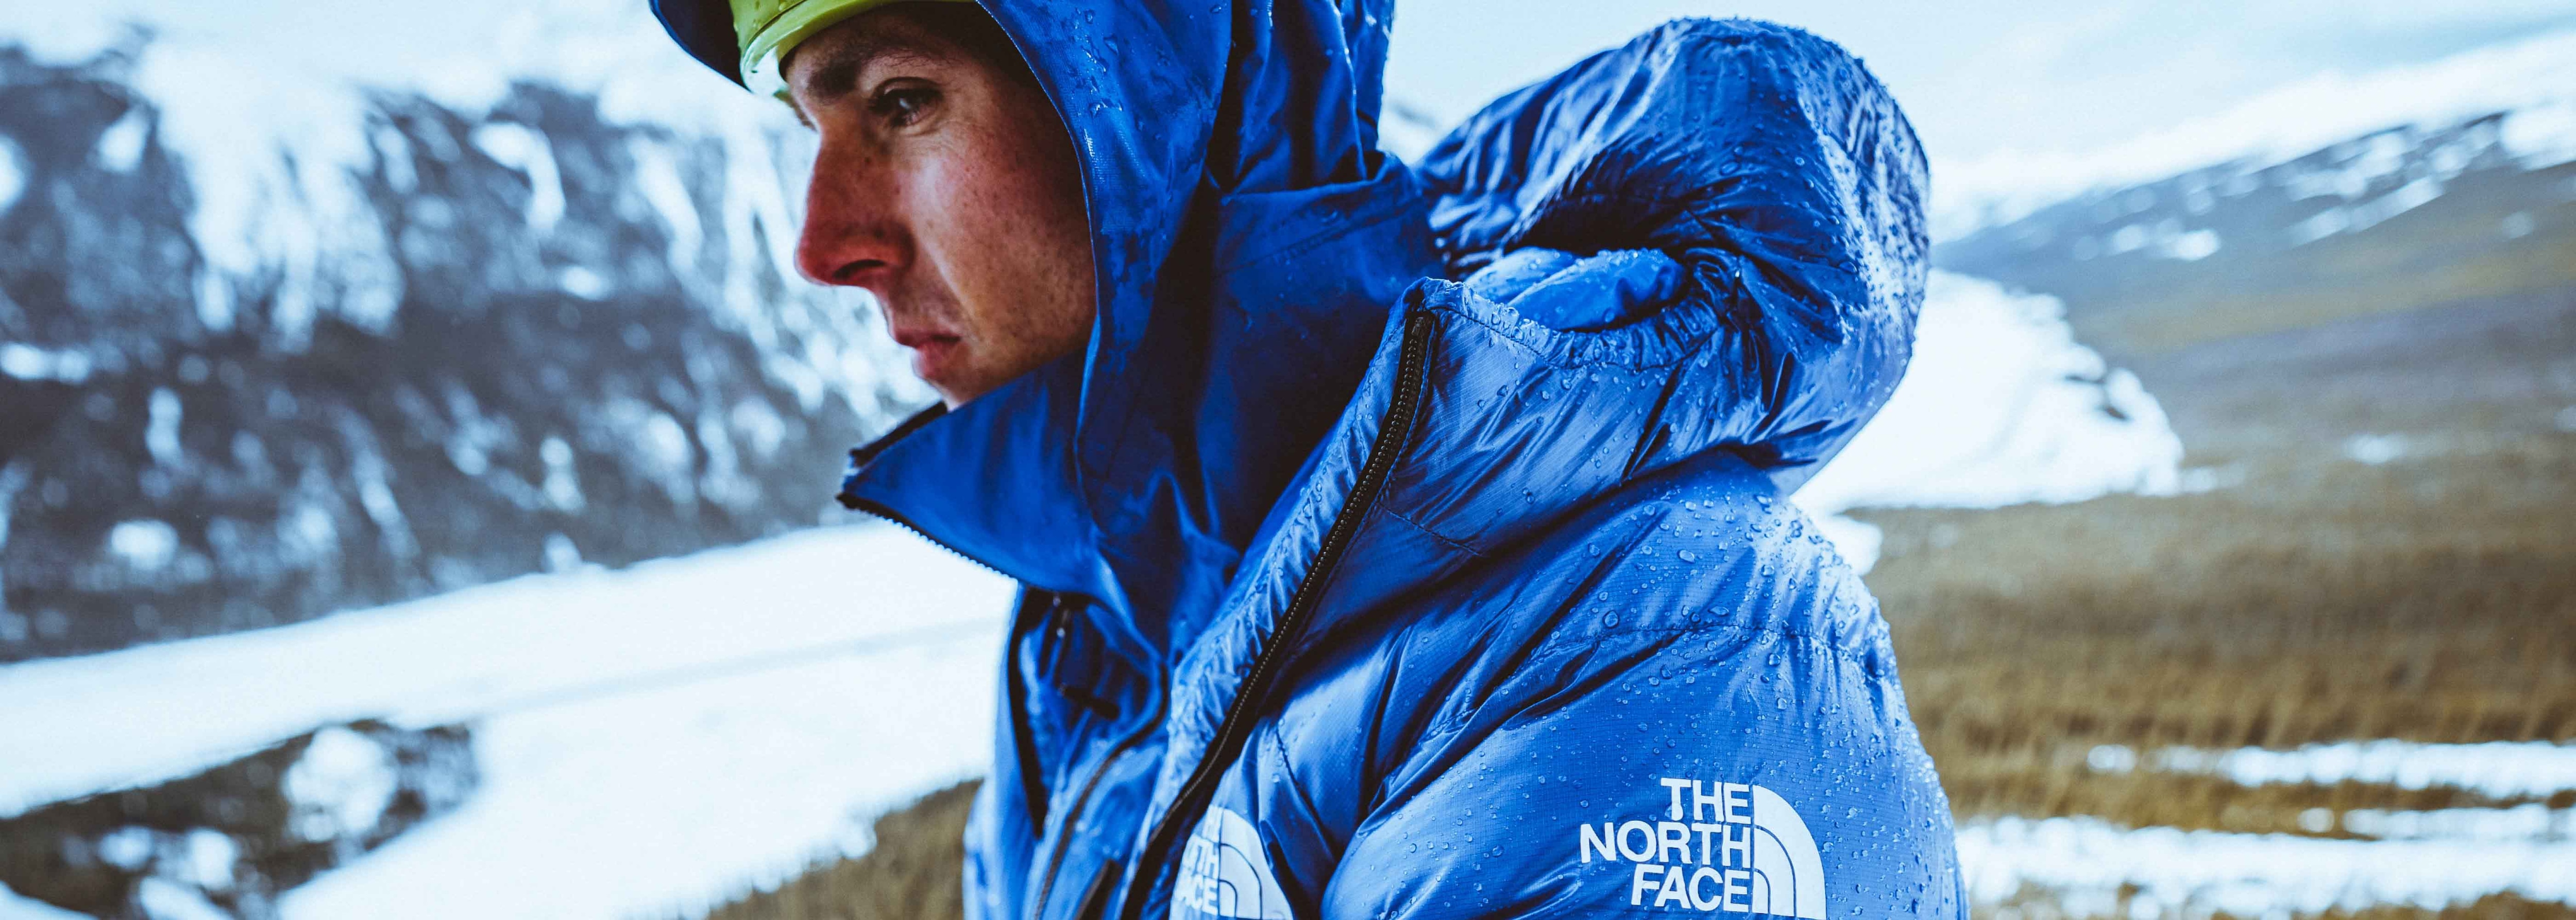 The North Face Outdoor Apparel  Gear